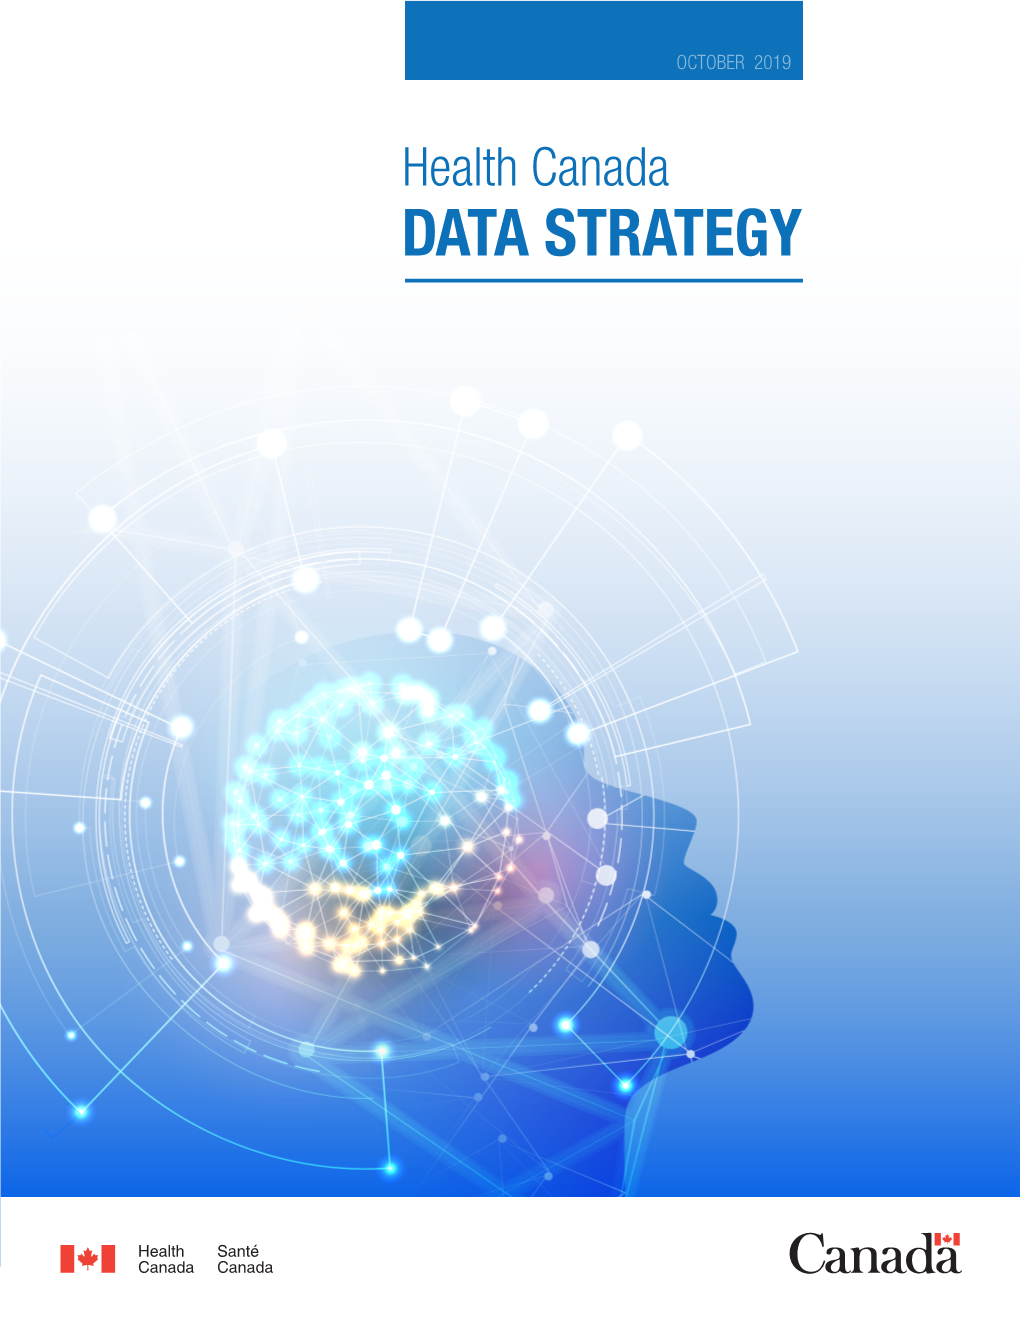 DATA STRATEGY Health Canada Is the Federal Department Responsible for Helping the People of Canada Maintain and Improve Their Health